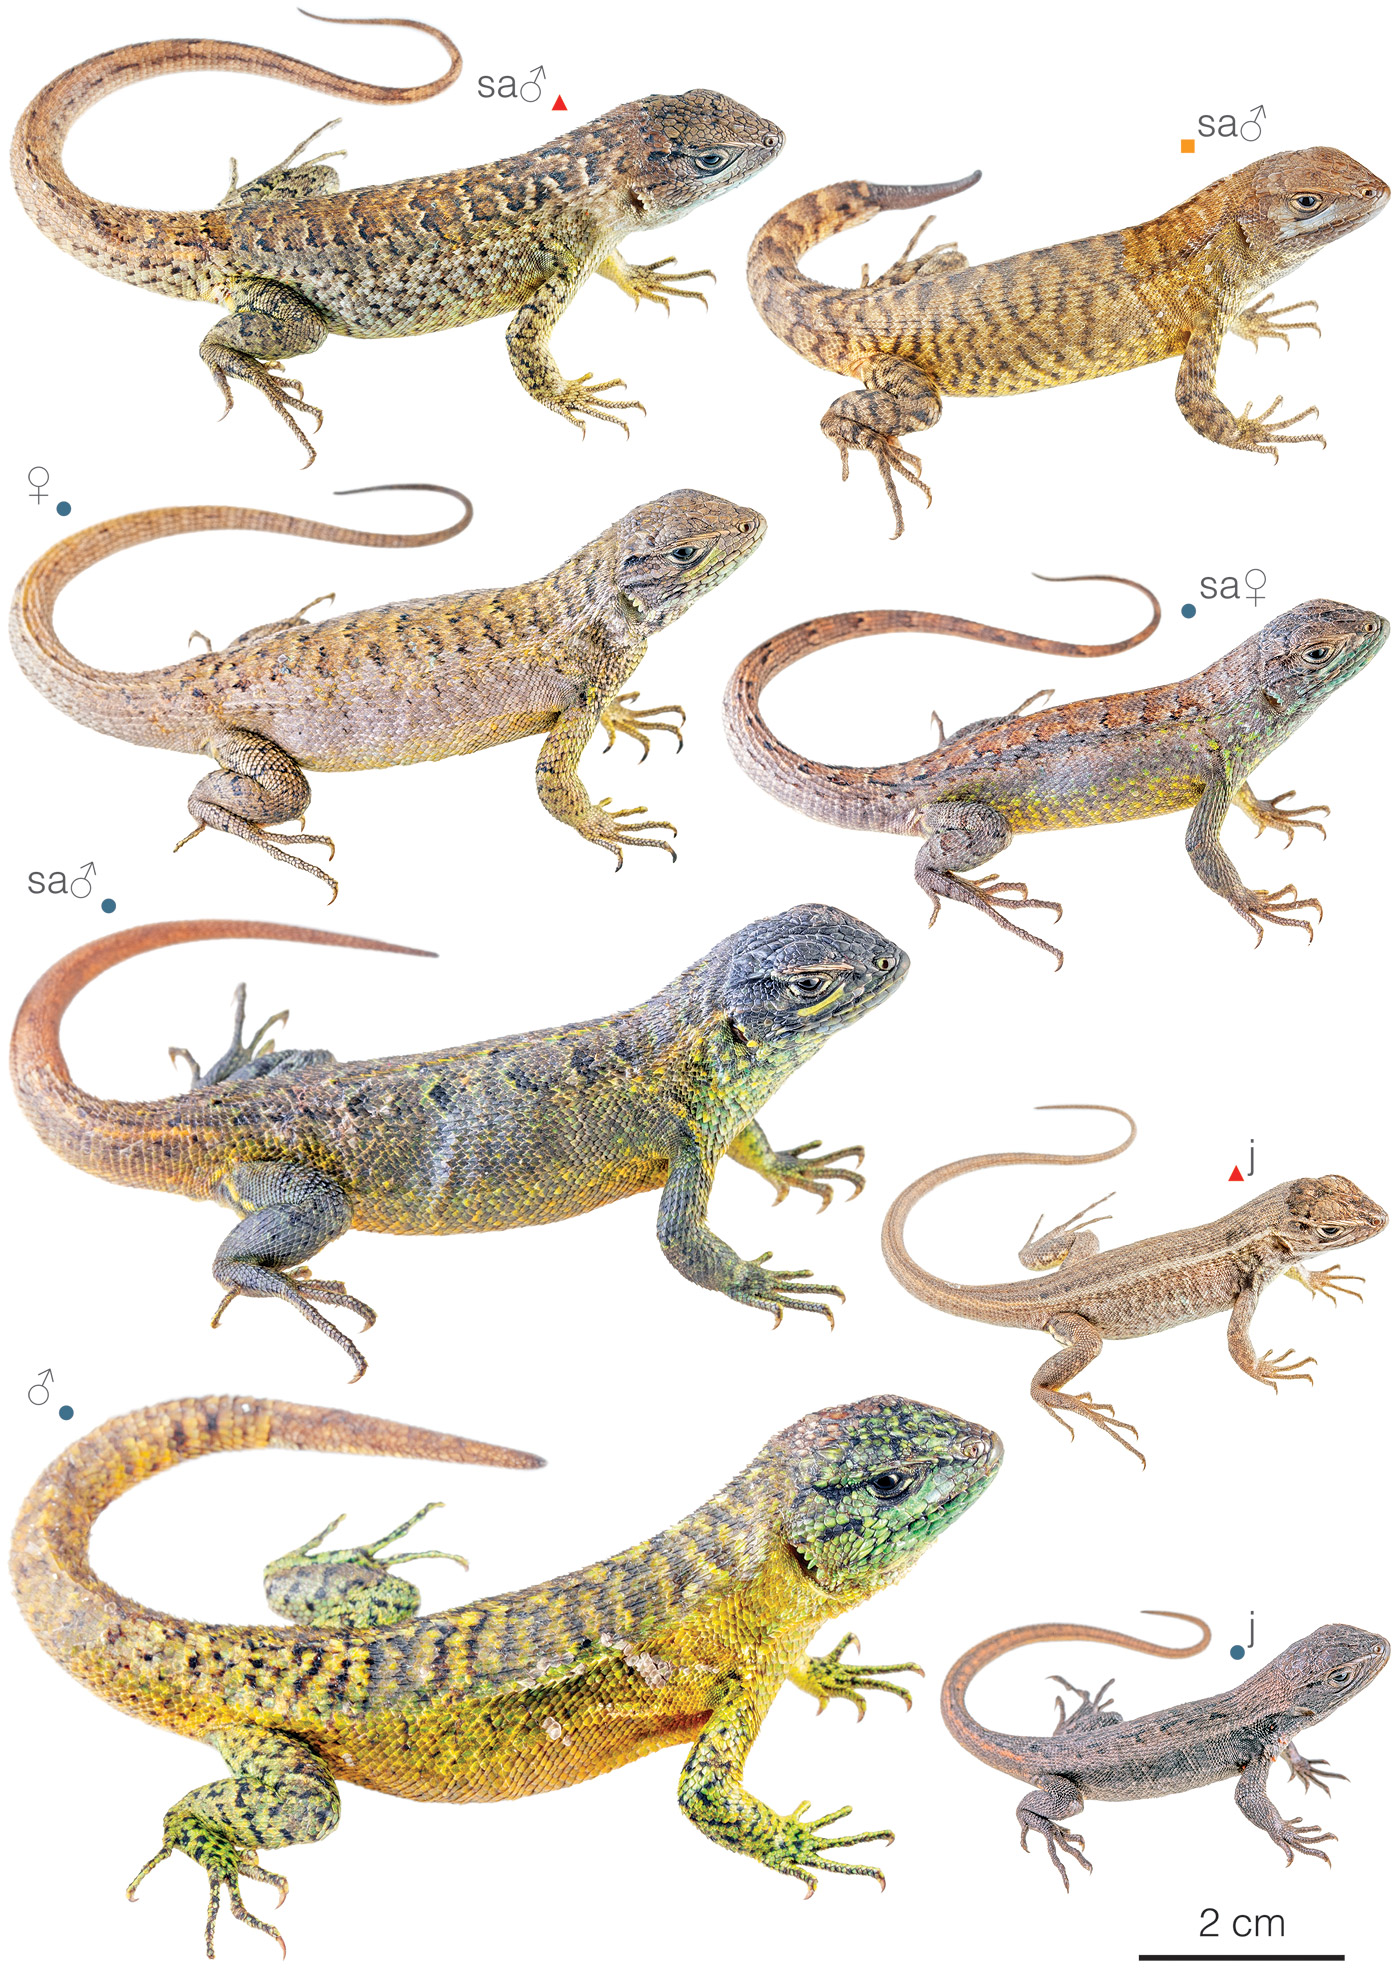 Figure showing variation among individuals of Stenocercus cadlei